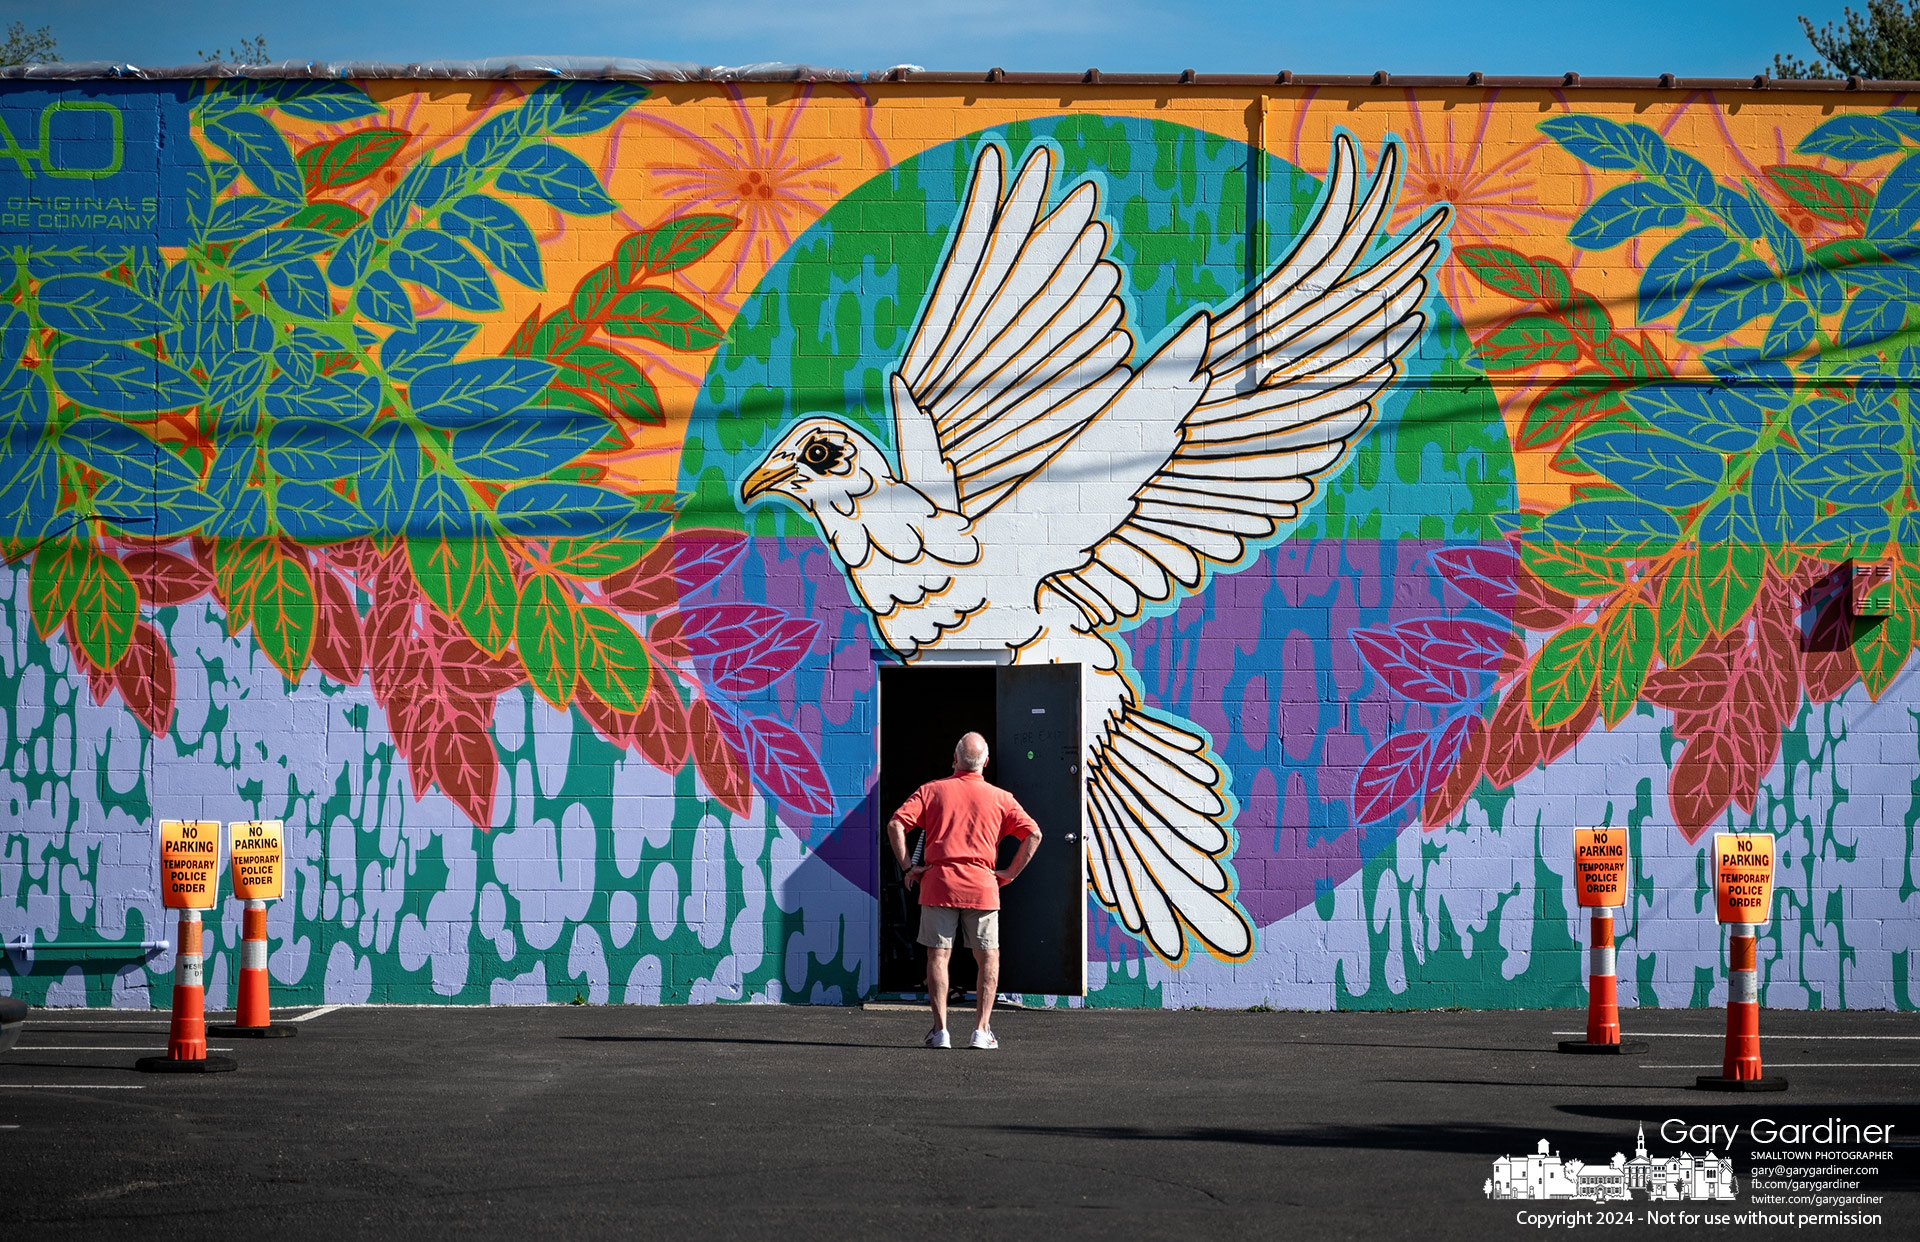 An Amish Originals worker surveys the completed "Peace" mural on the side of the furniture store's building. My Final Photo for April 29, 2024.